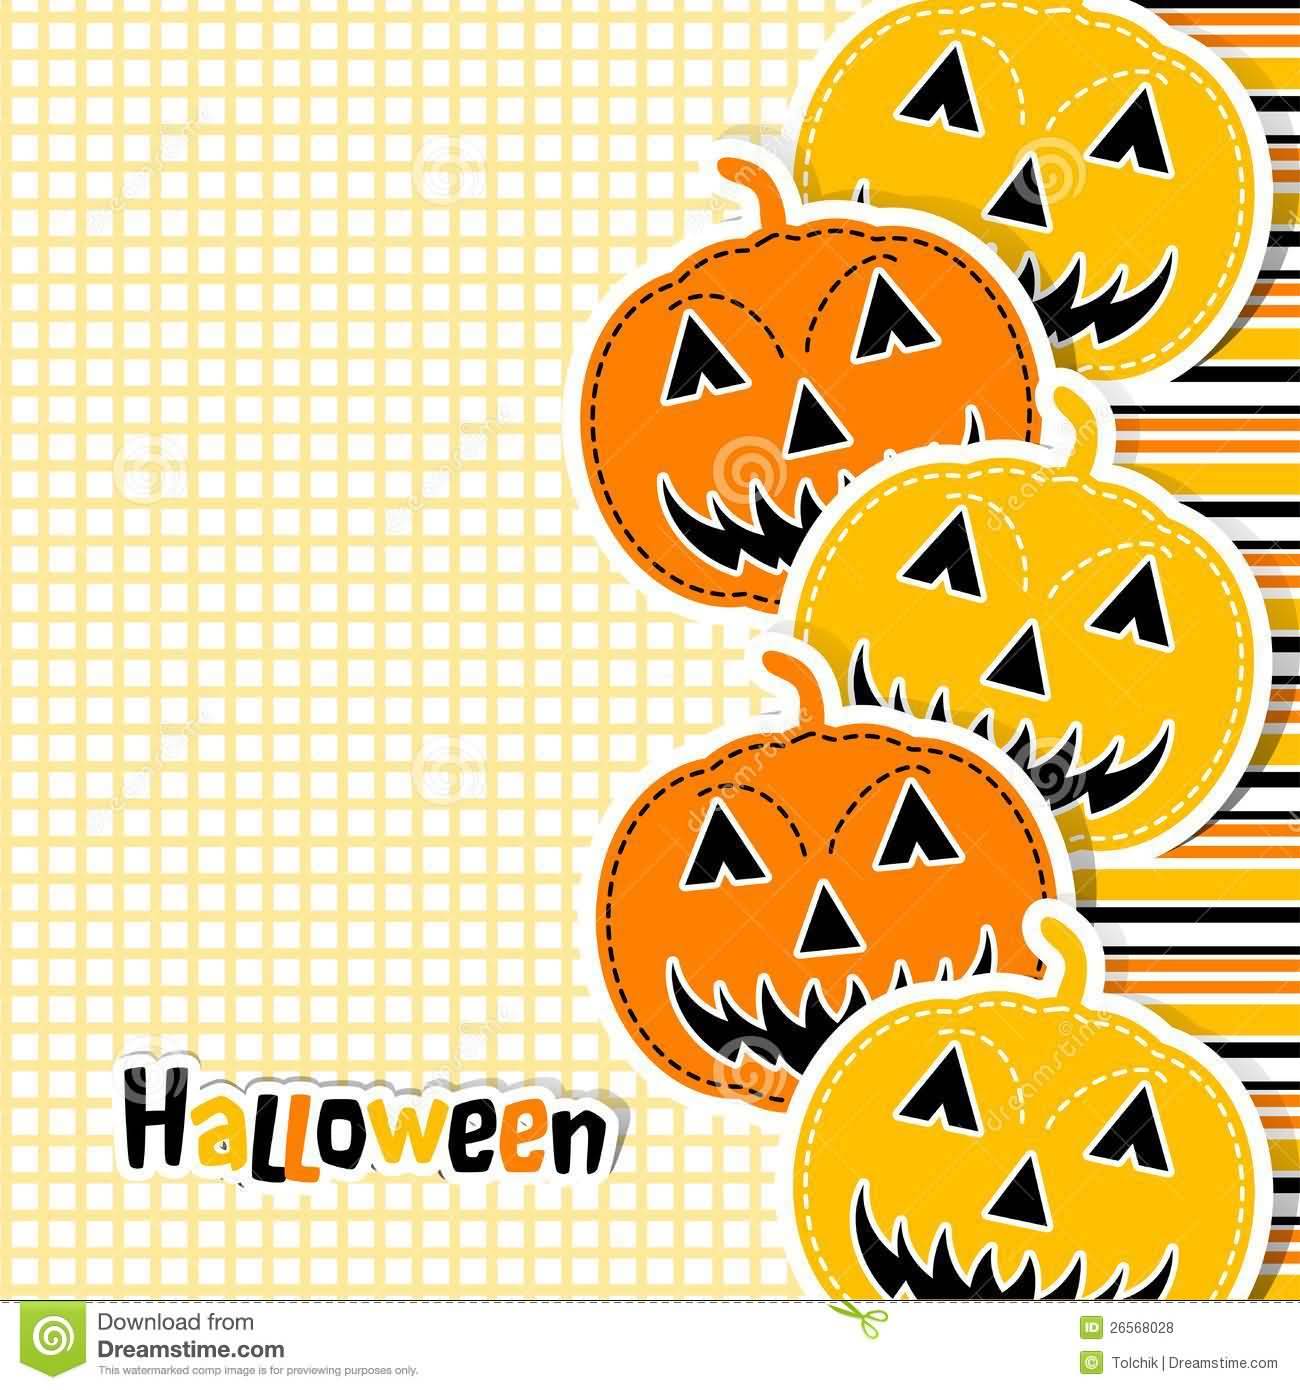 Happy Halloween Wishes To You Greeting Card